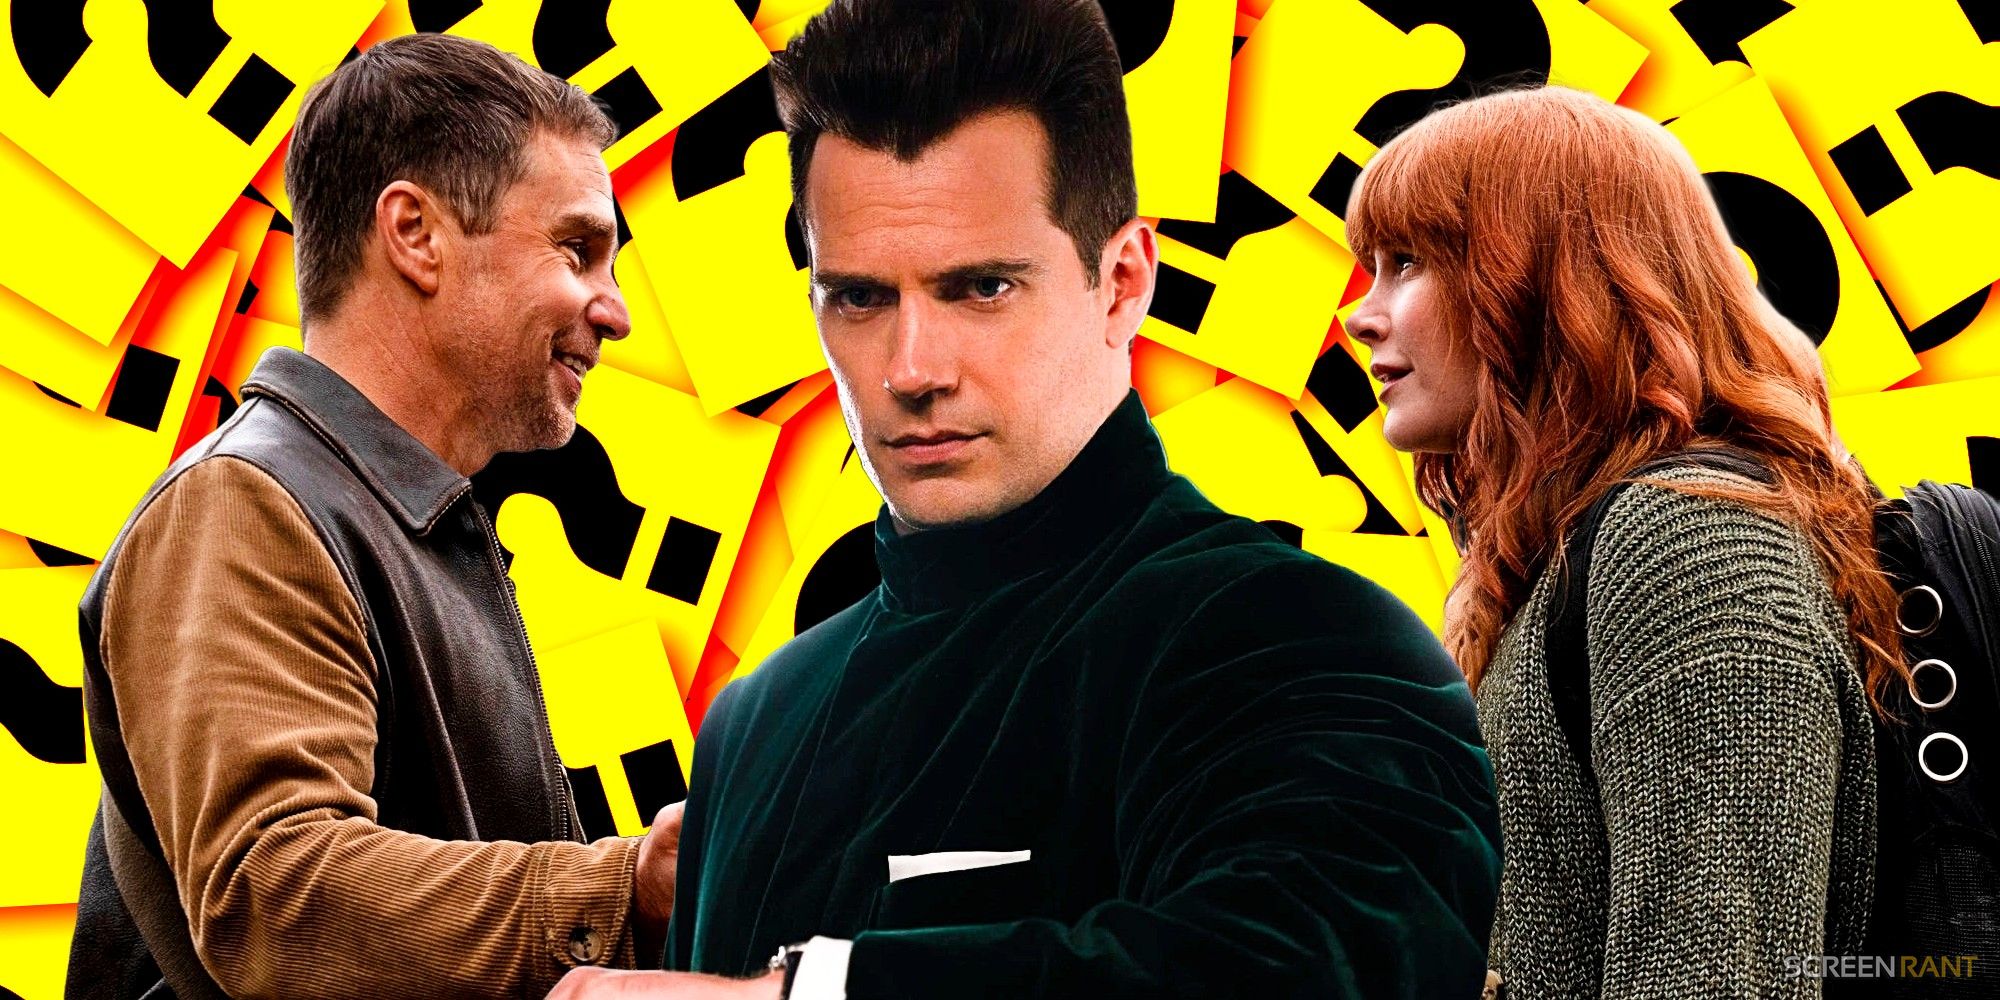 Sam Rockwell as Aidan, Henry Cavill as Argylle, and Bryce Dallas Howard as Elly Conway in Argylle with question marks behind them